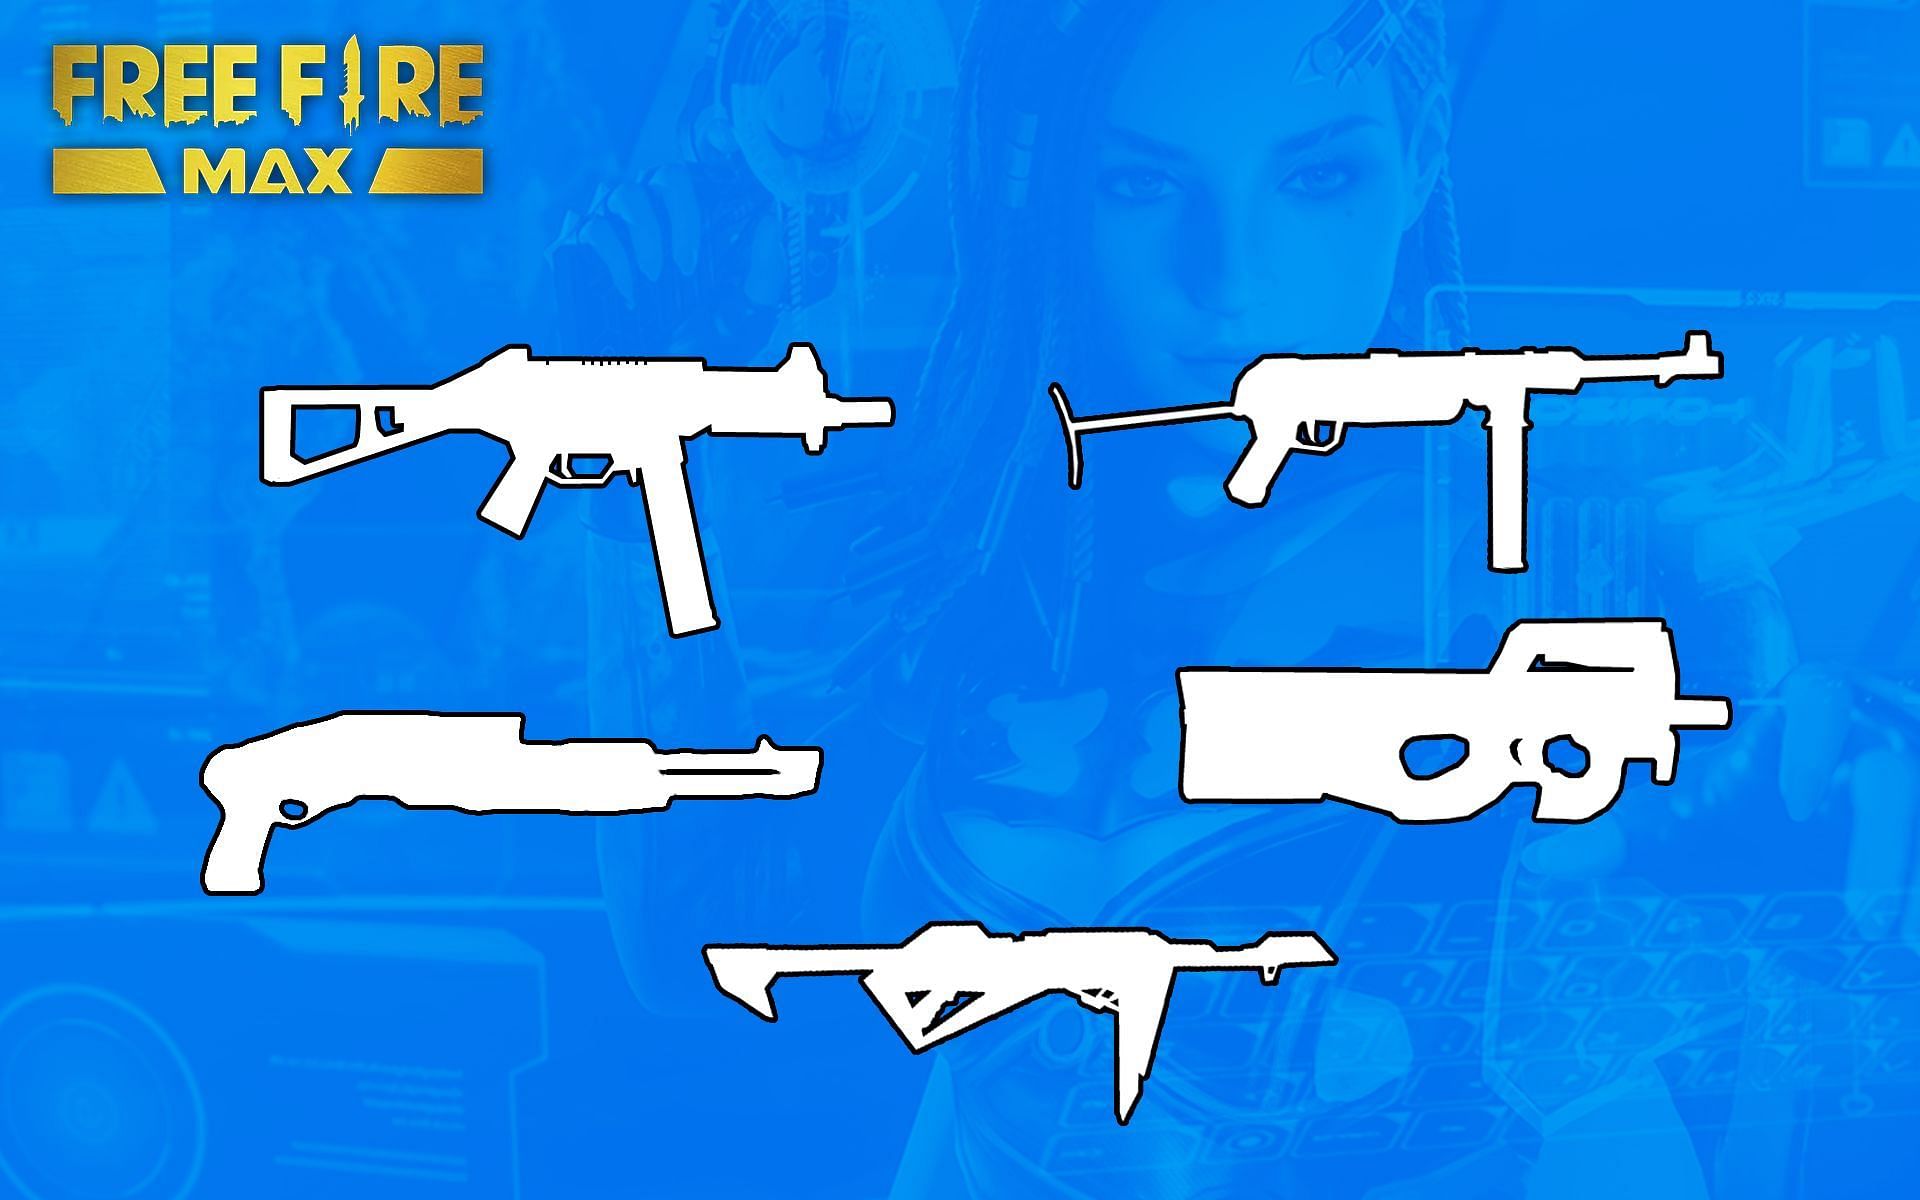 The best submachine guns in Free Fire MAX right now (Image via Sportskeeda)